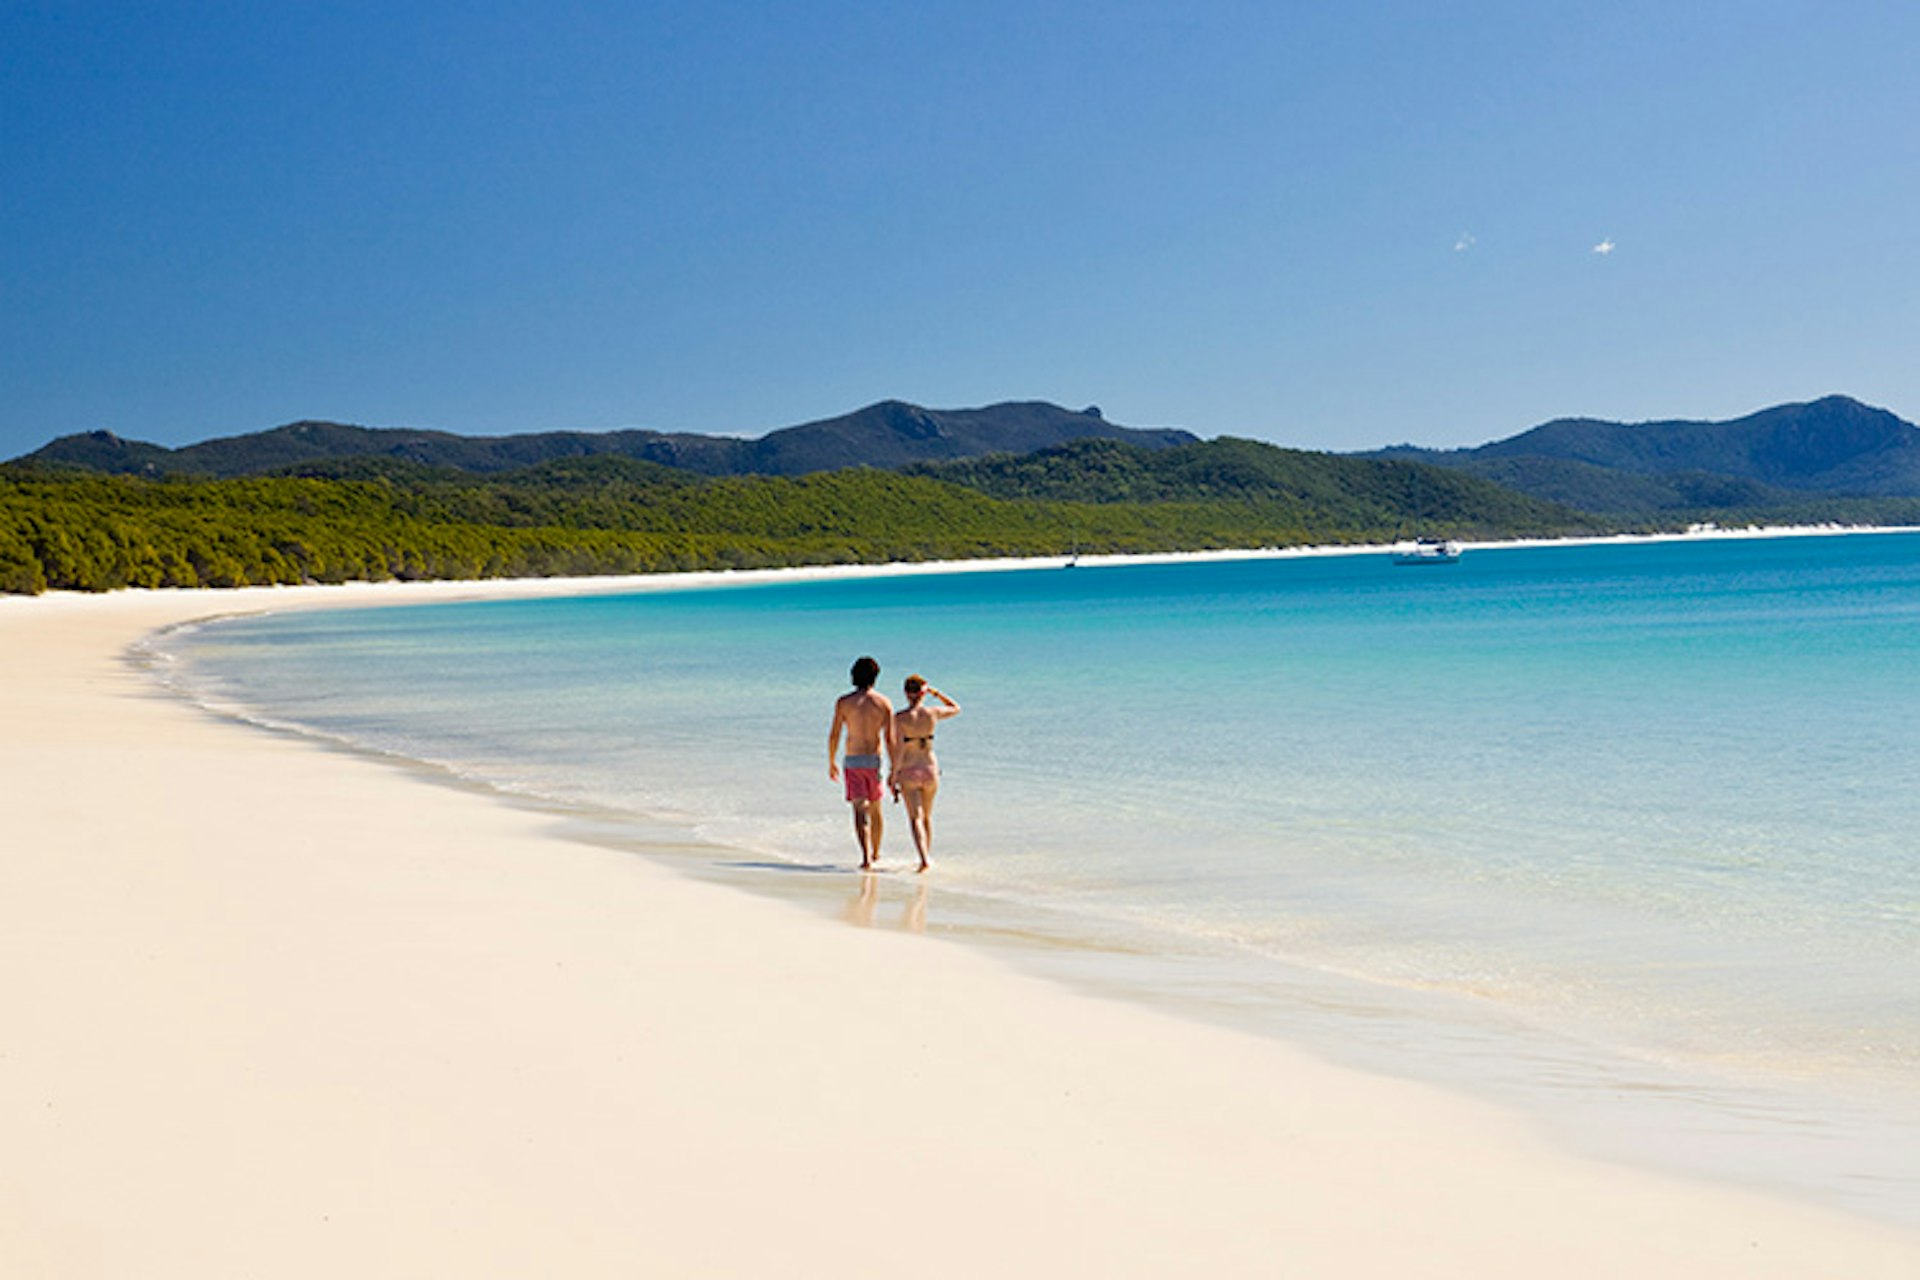 Head for Whitehaven Beach in the Whitsunday Islands, a tropical paradise perfect for the recently single. Image by Andrew Watson / The Image Bank / Getty Images.